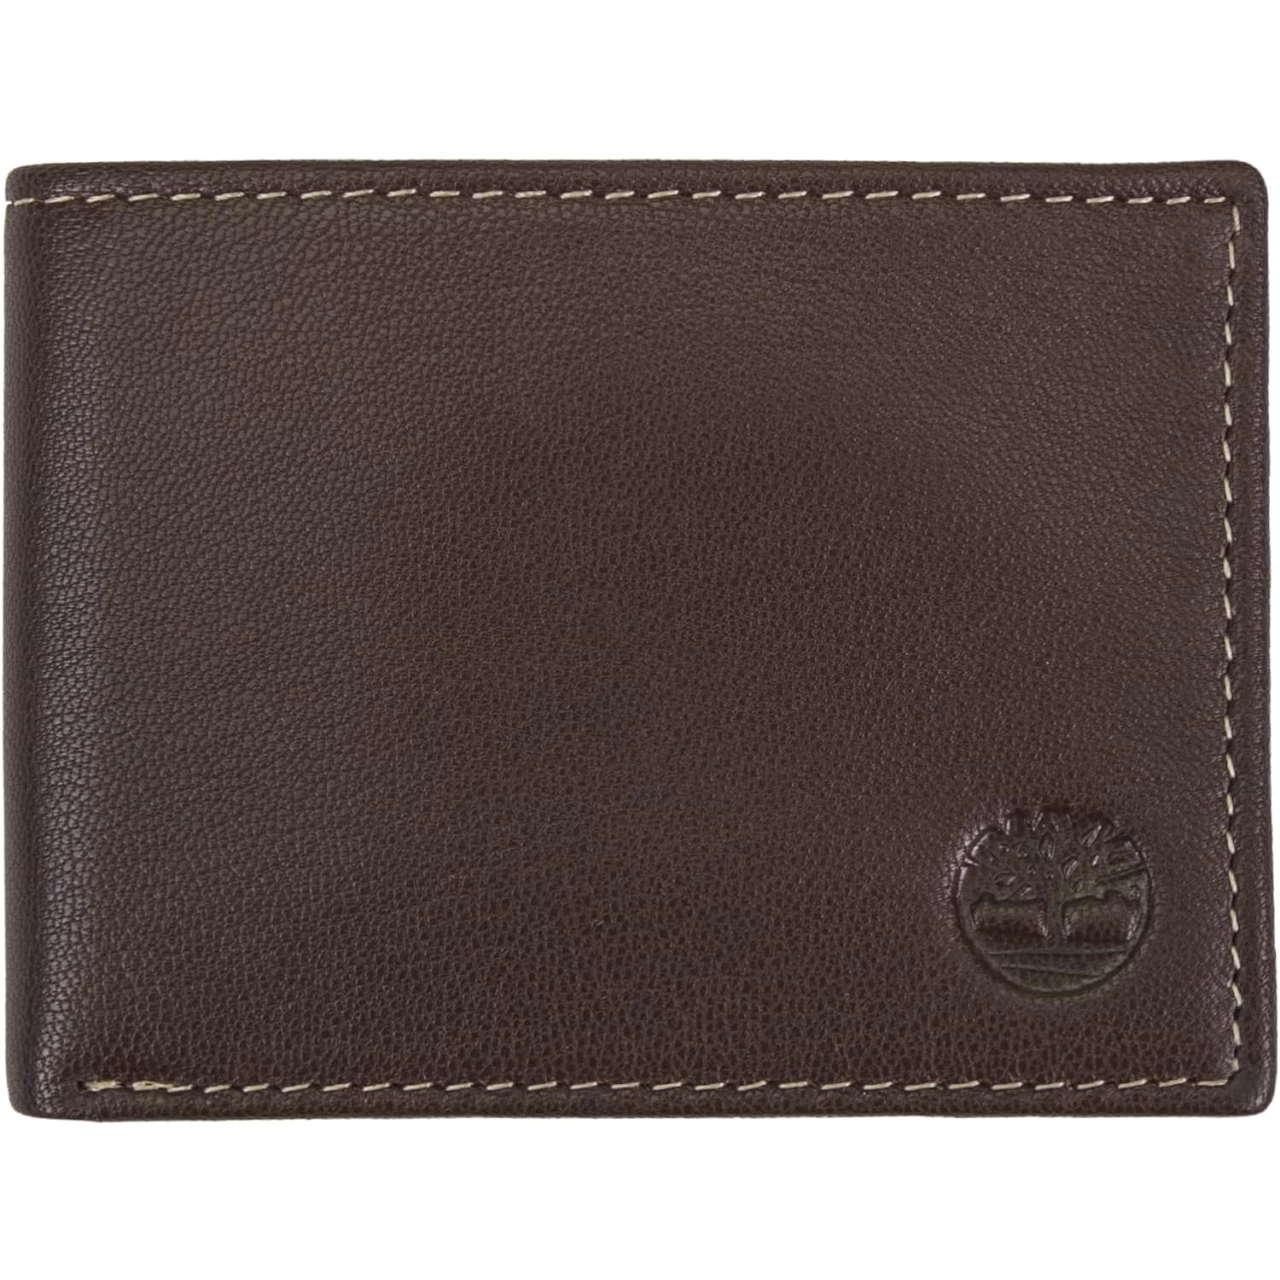 Timberland Men&rsquo;s Blix Slimfold Leather Wallet